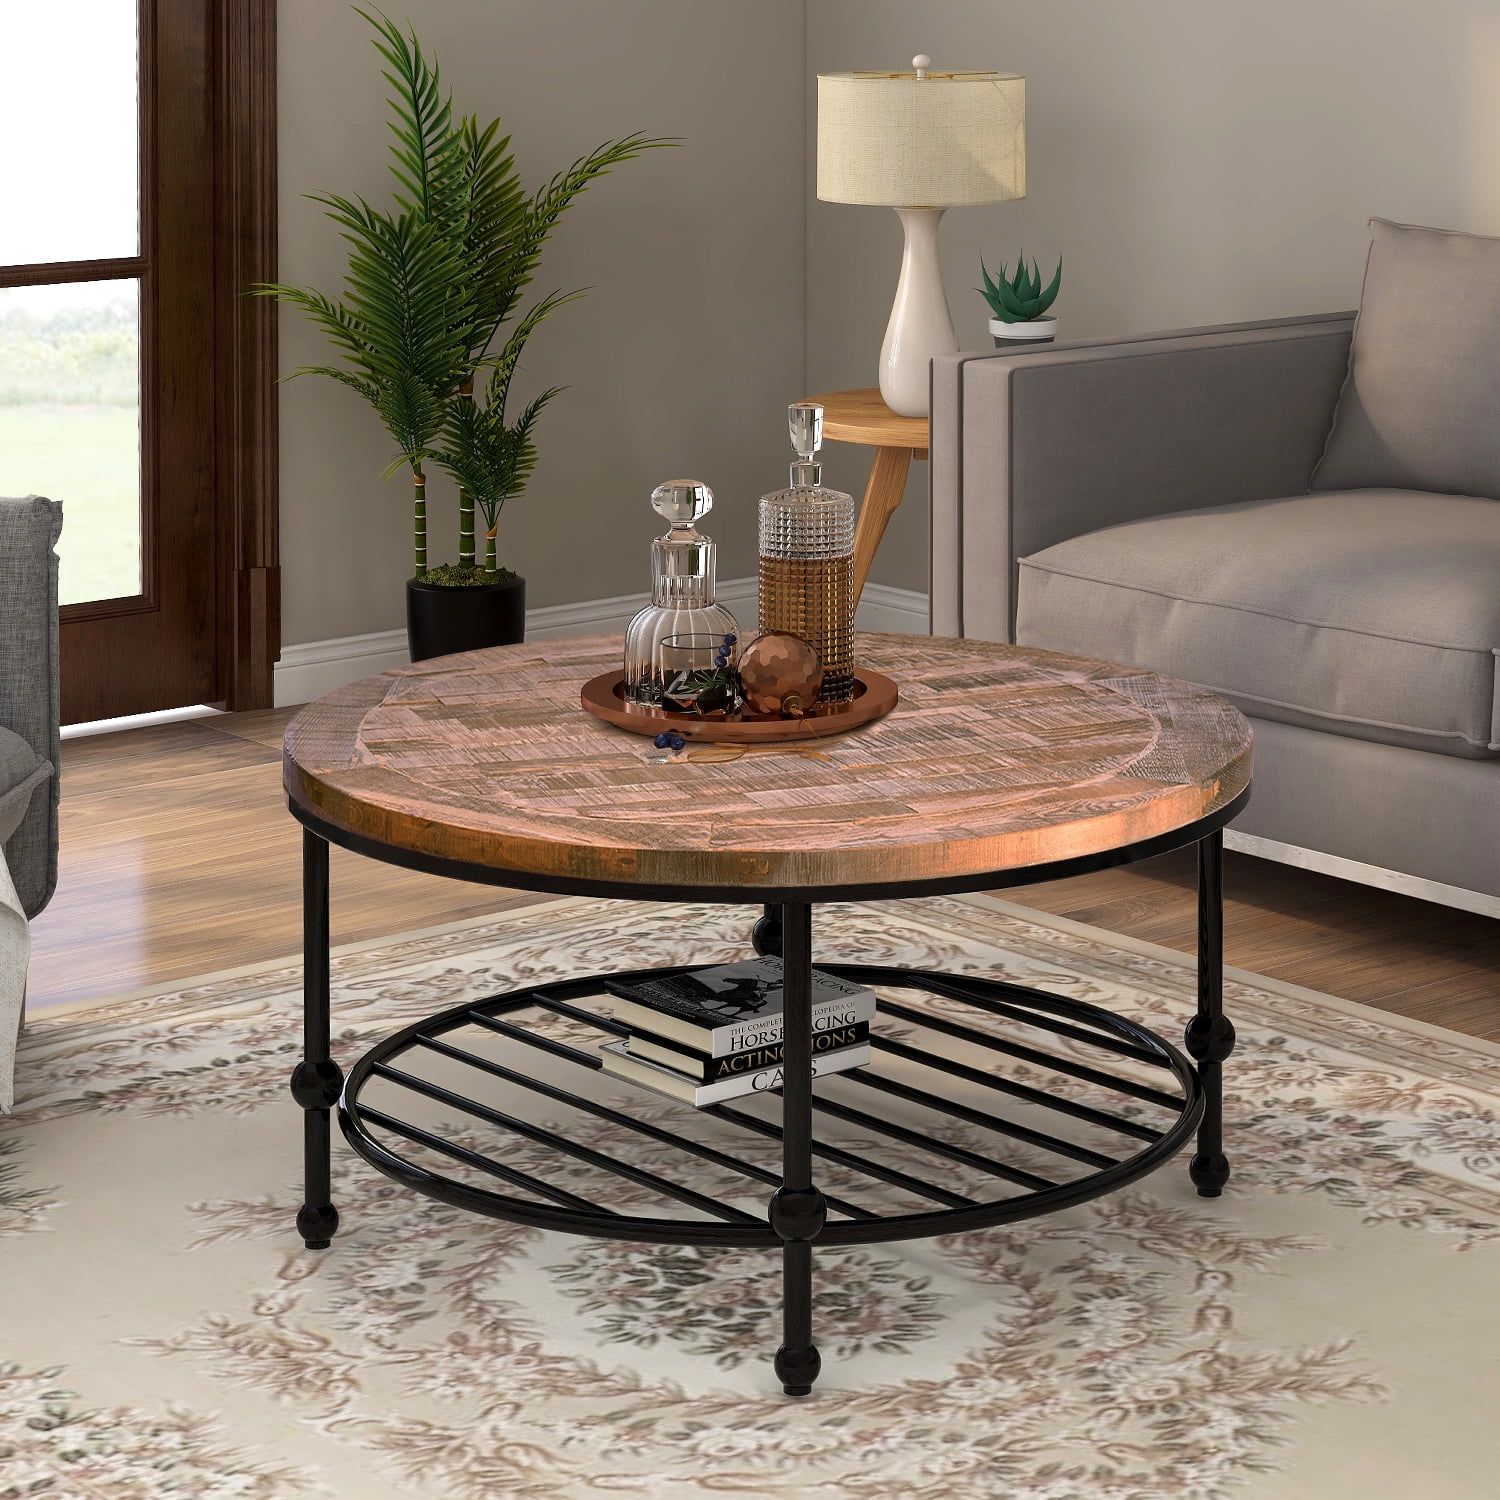 Rustic Natural Round Coffee Table With Storage Shelf For Living Room Throughout Outdoor Half Round Coffee Tables (Gallery 19 of 20)